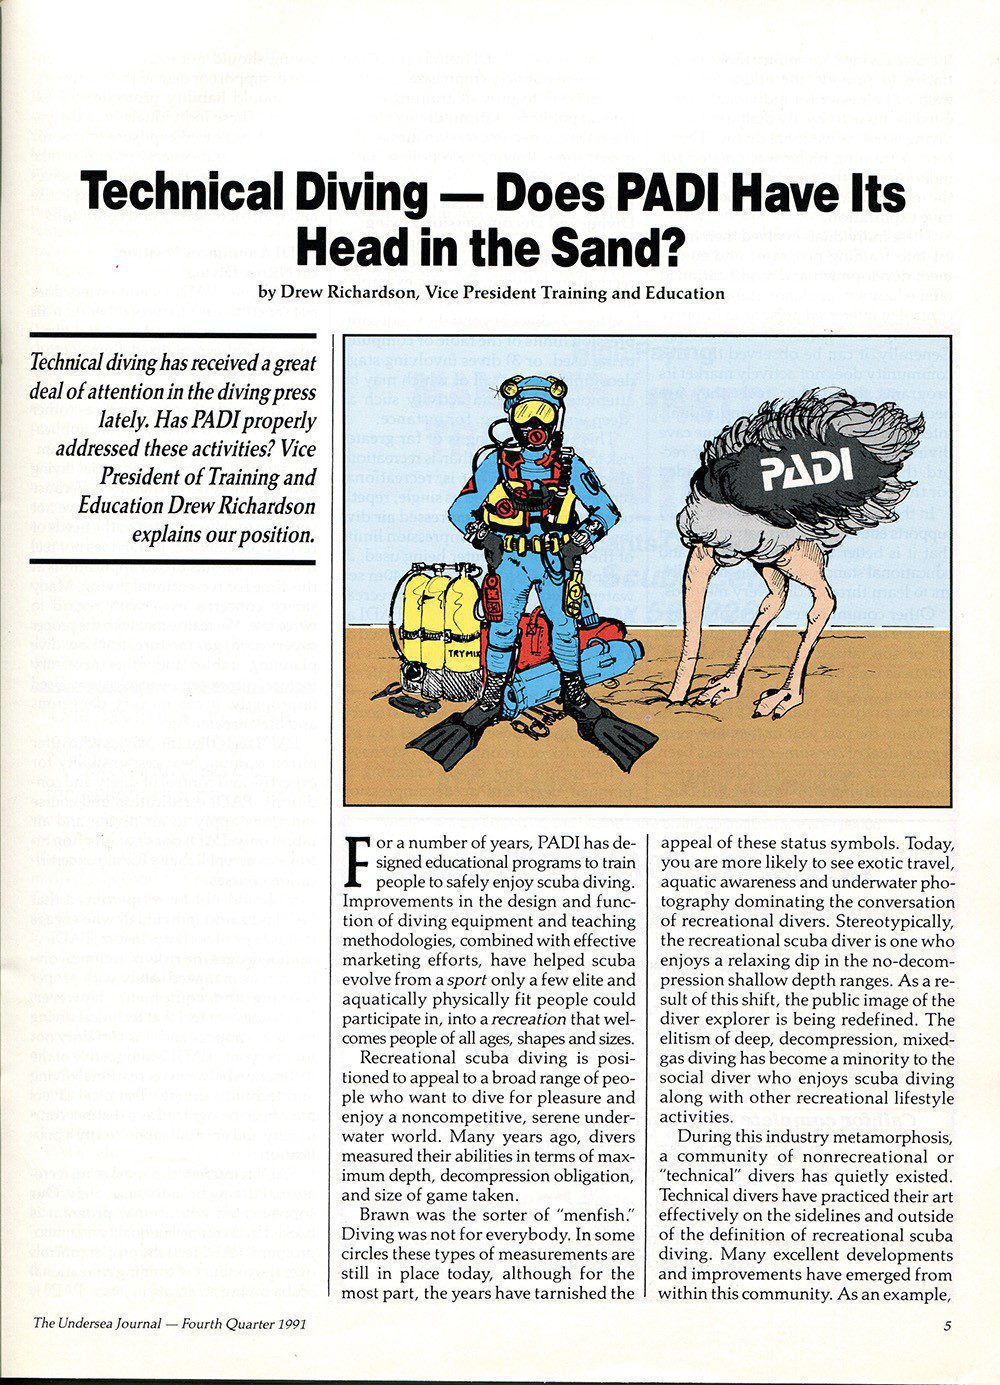 Drew Richardson wrote this article in the Undersea Journal 28 years ago. Today he is President and CEO of PADI.